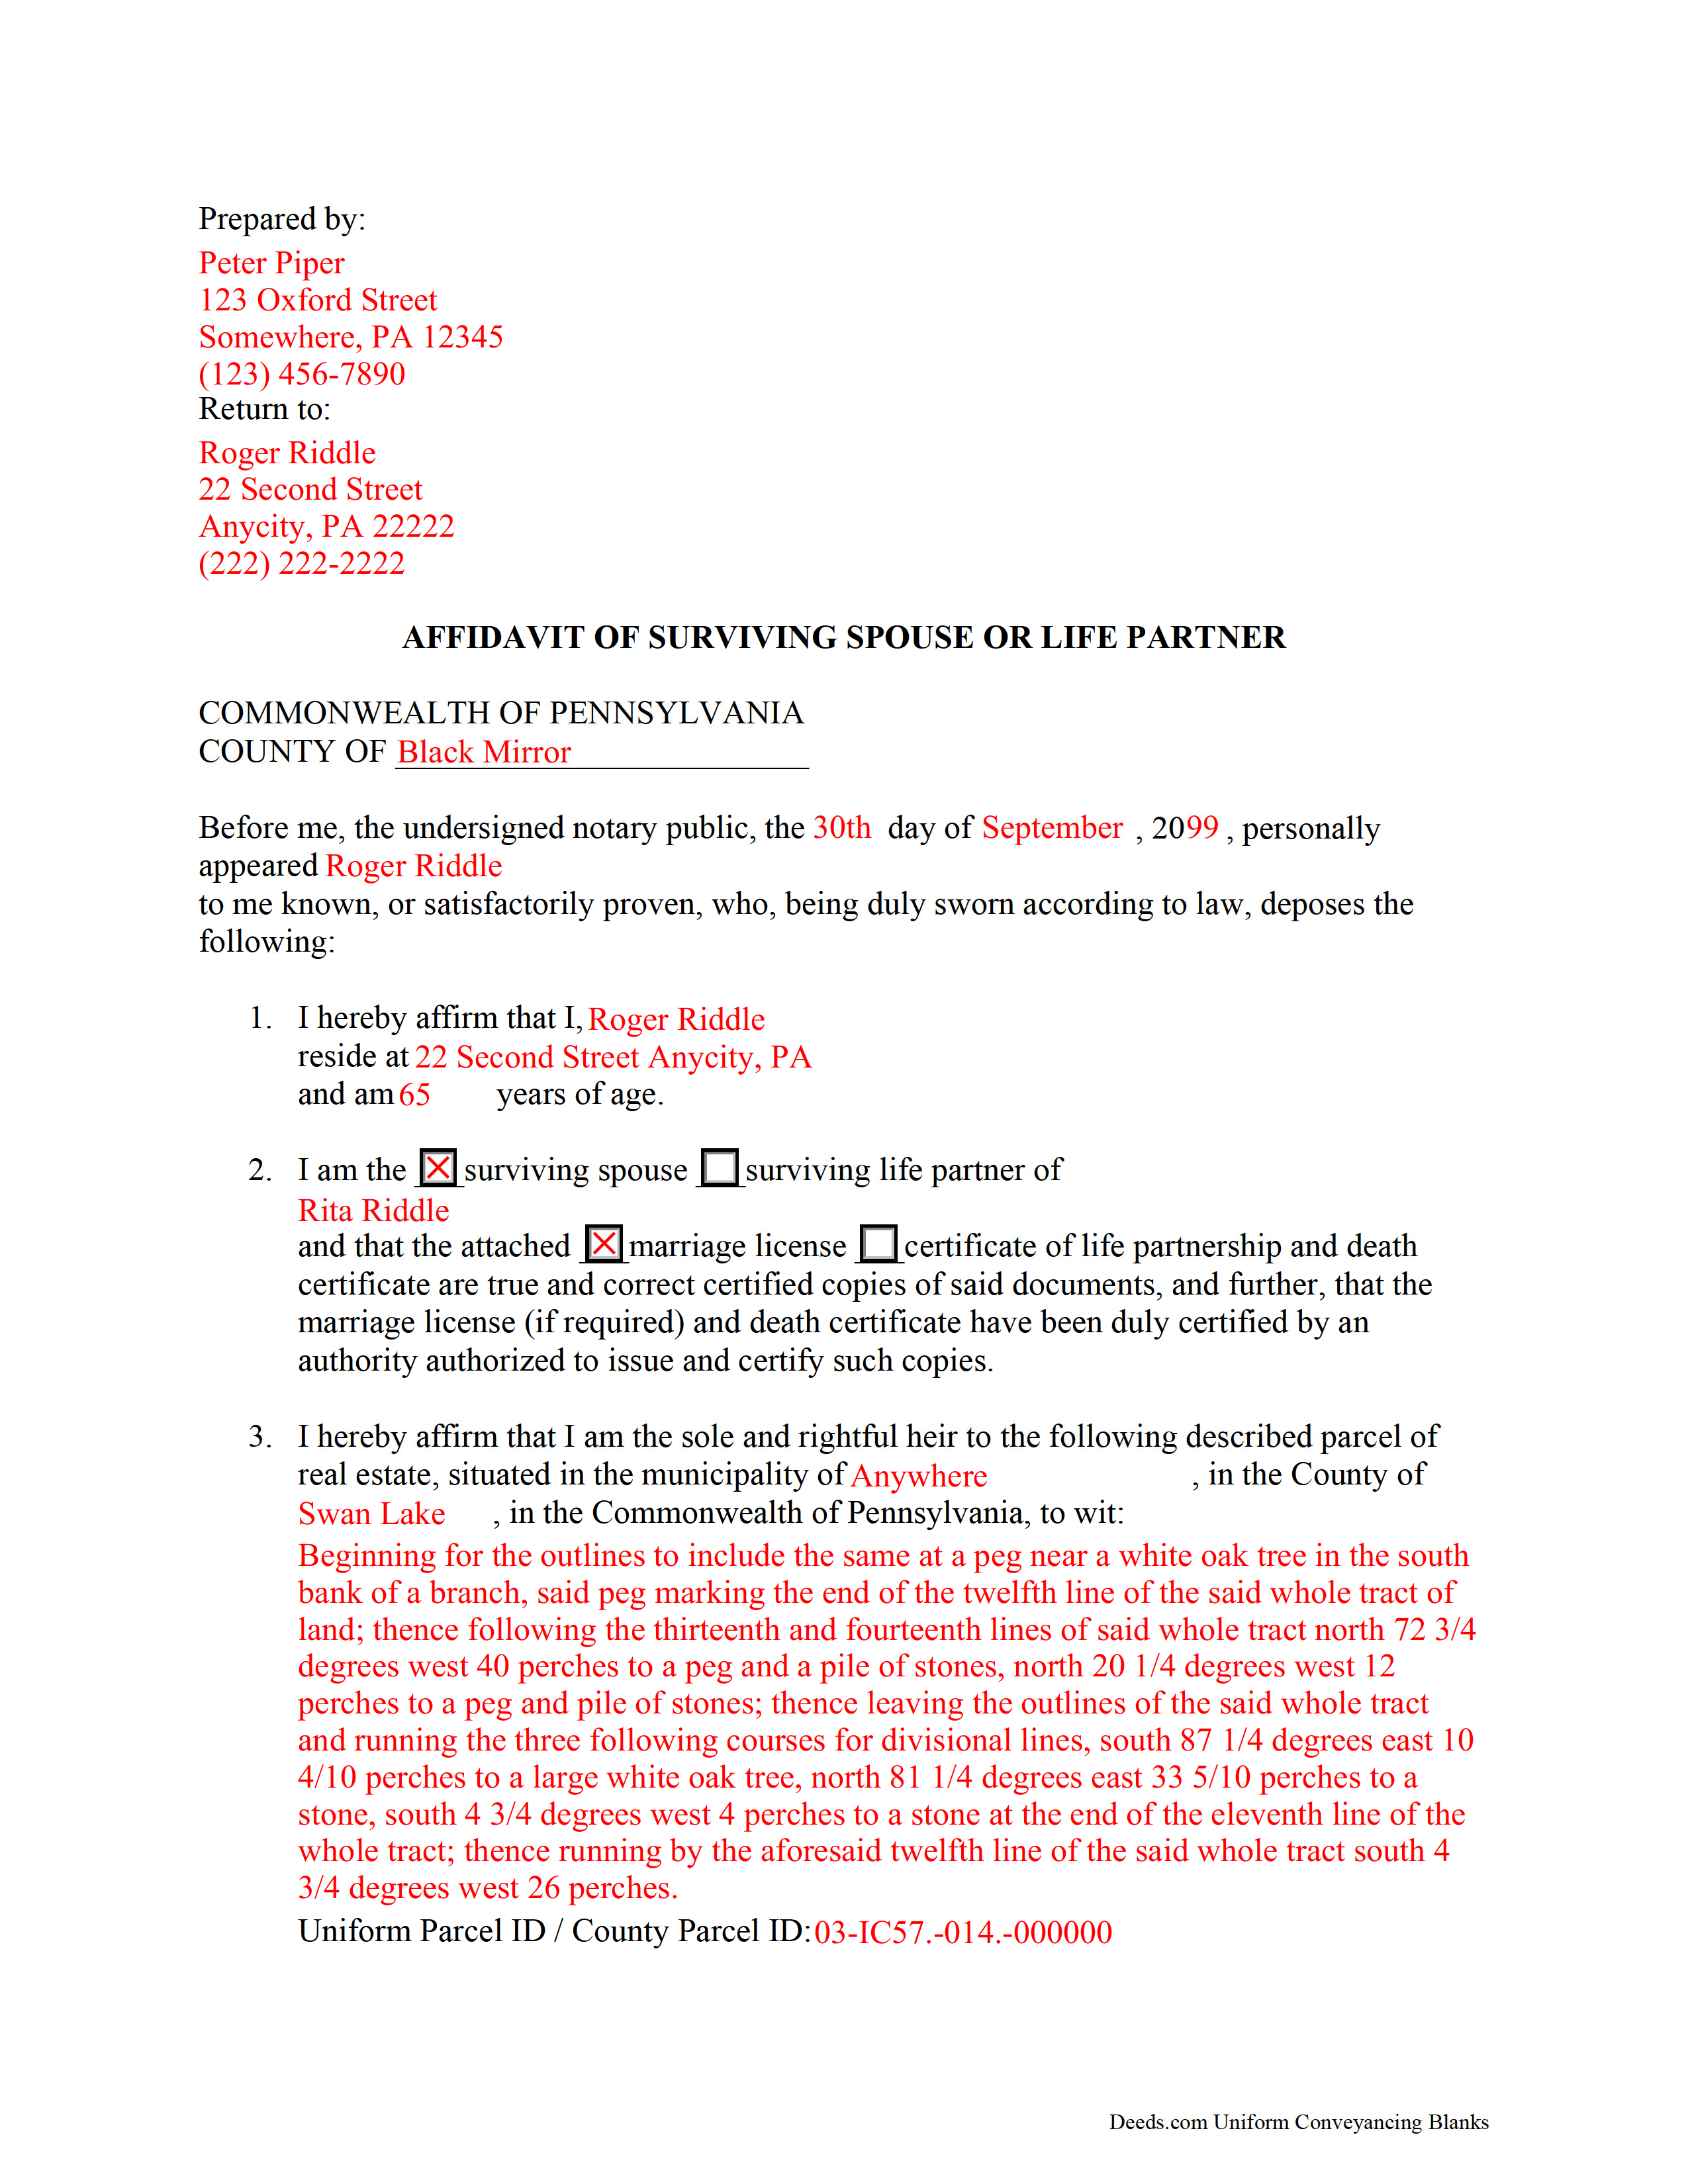 Completed Example of the Affidavit of Surviving Spouse Document